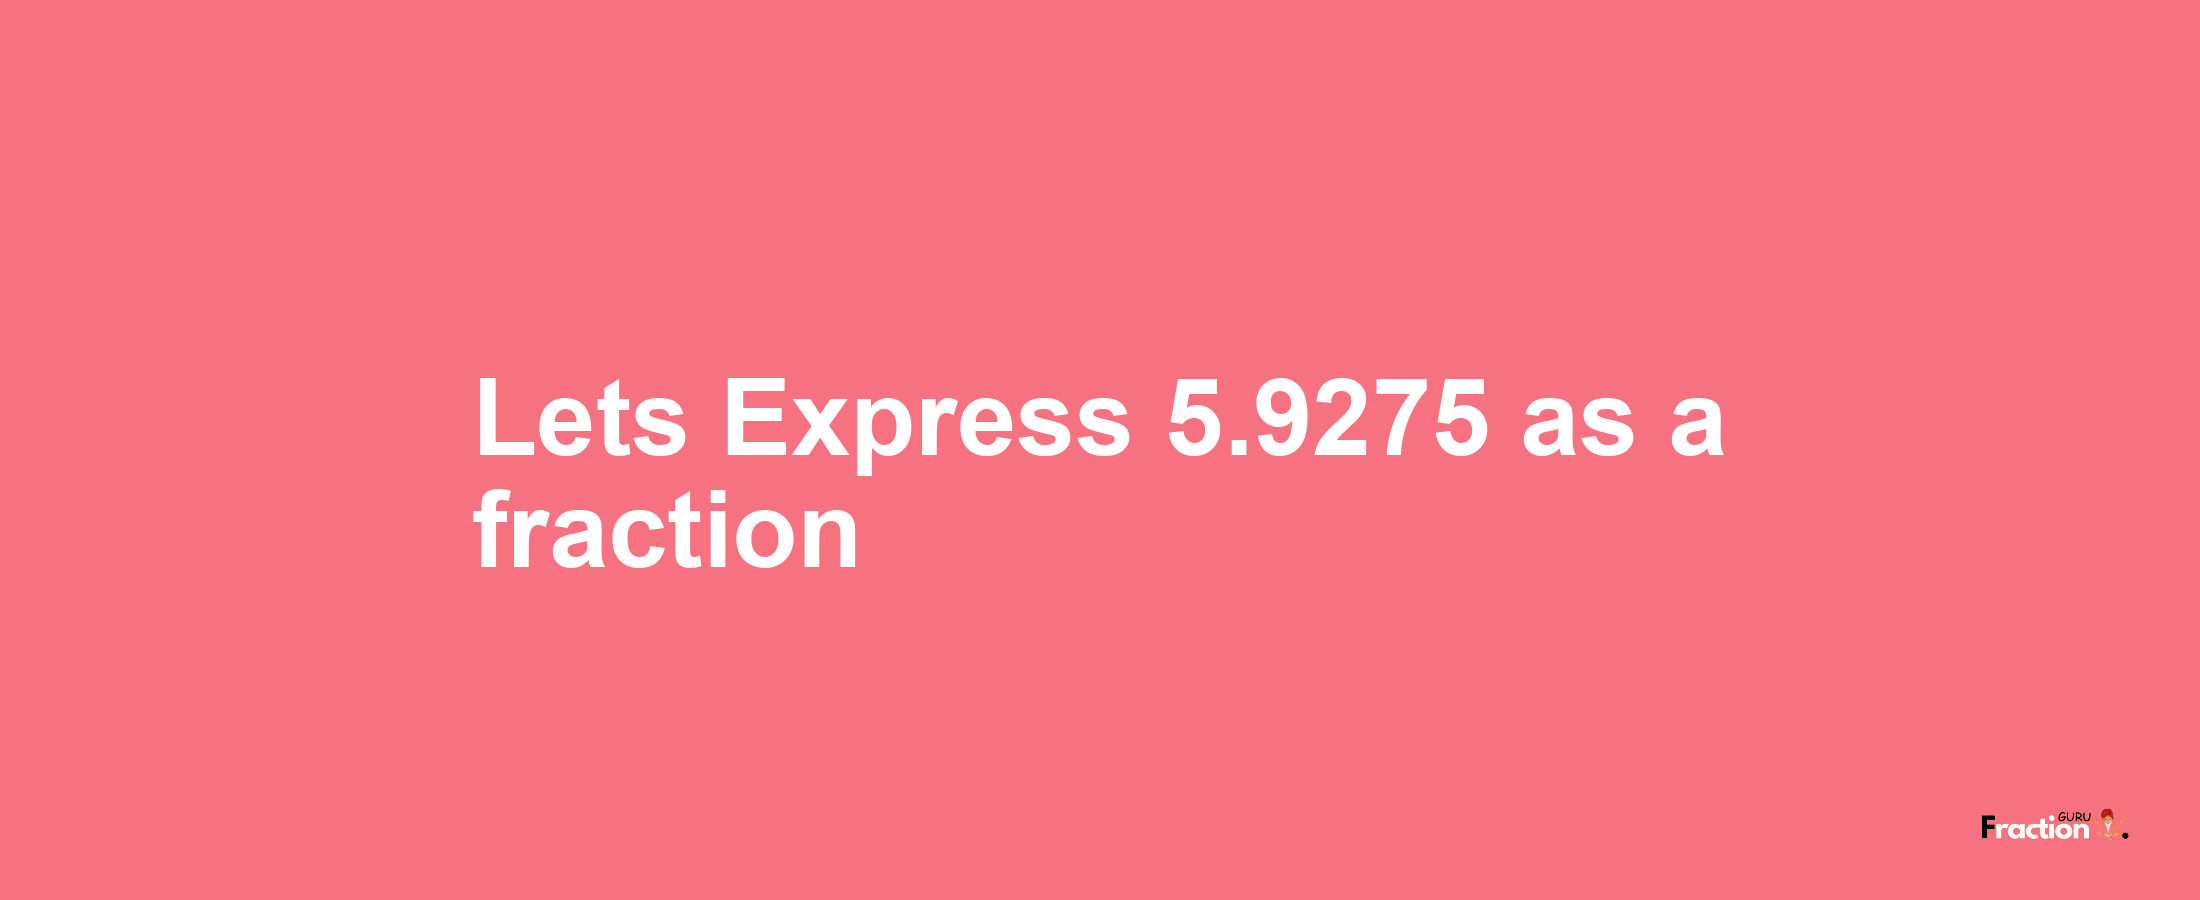 Lets Express 5.9275 as afraction